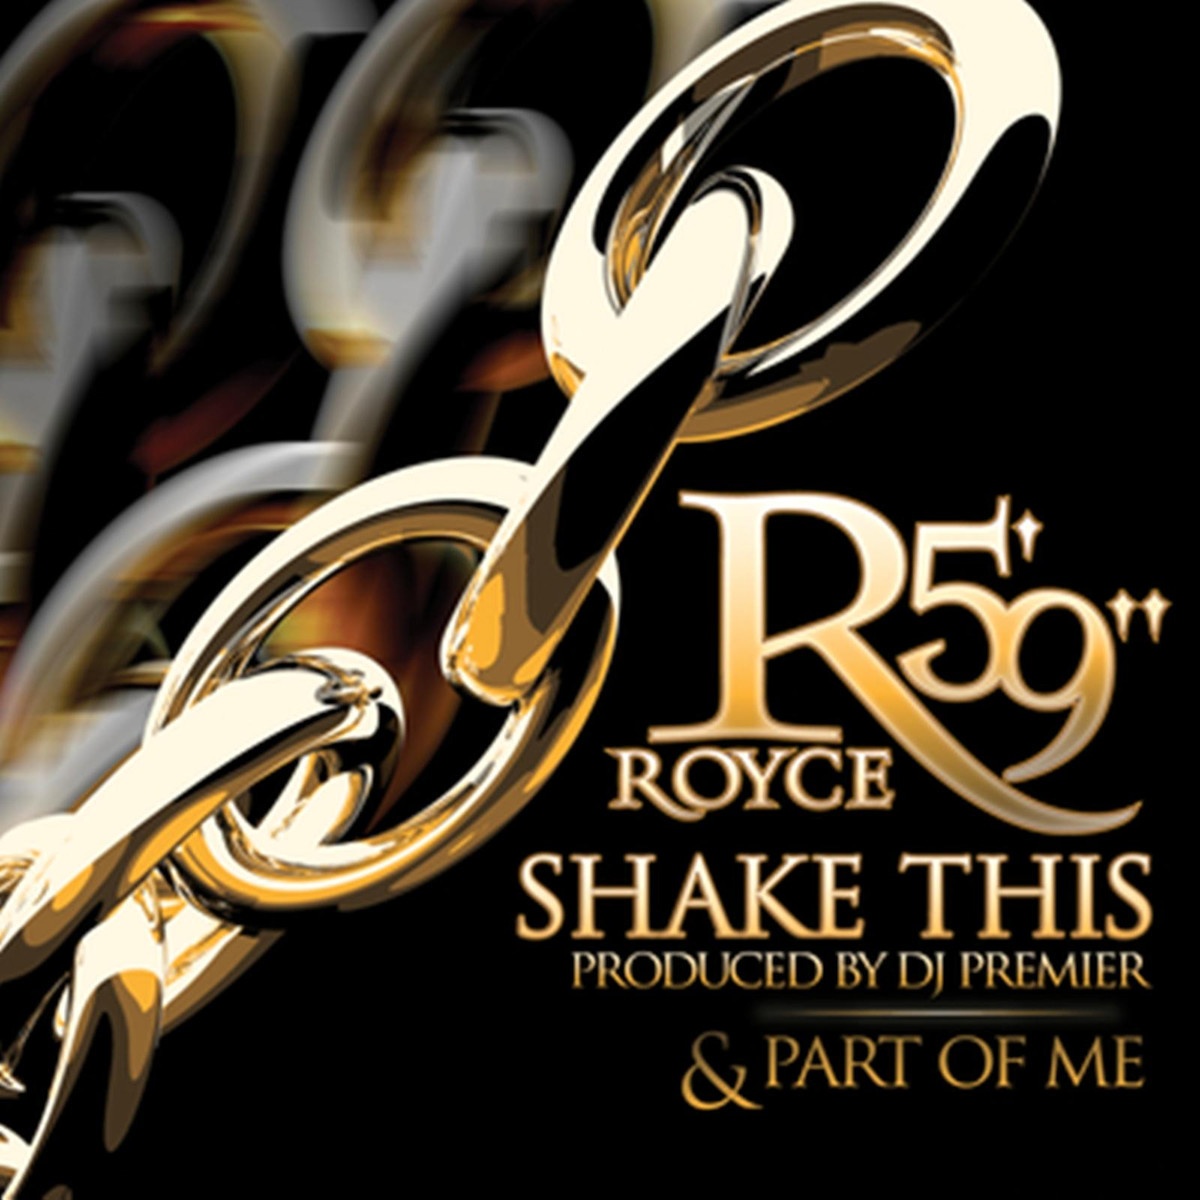 Shake This / Part Of Me